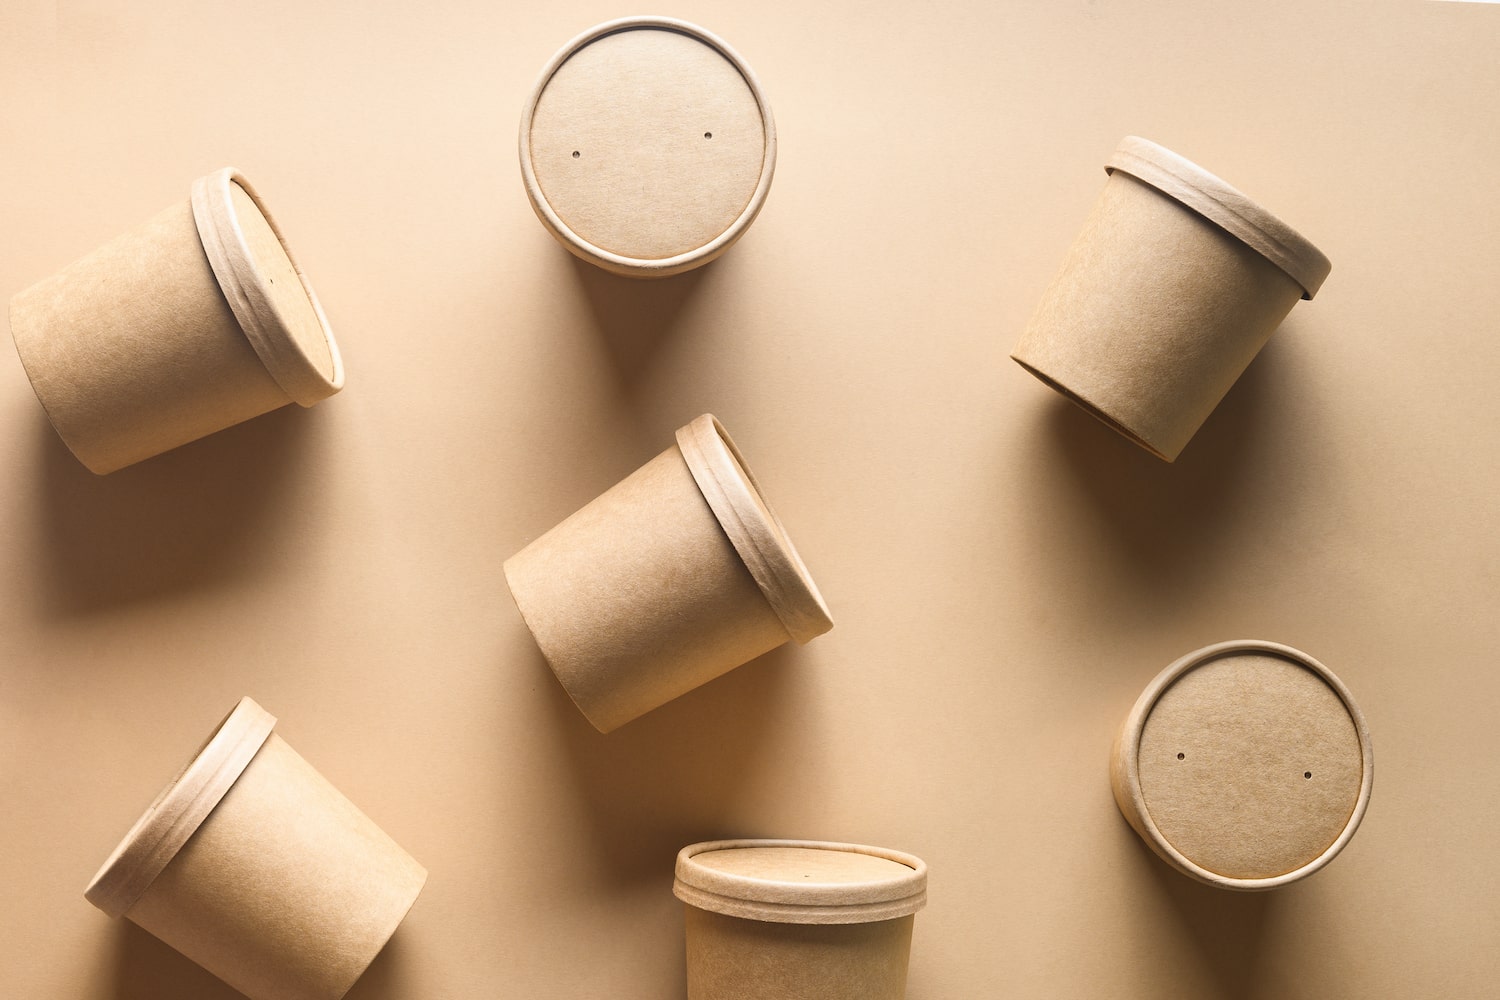 eco-friendly packaging materials